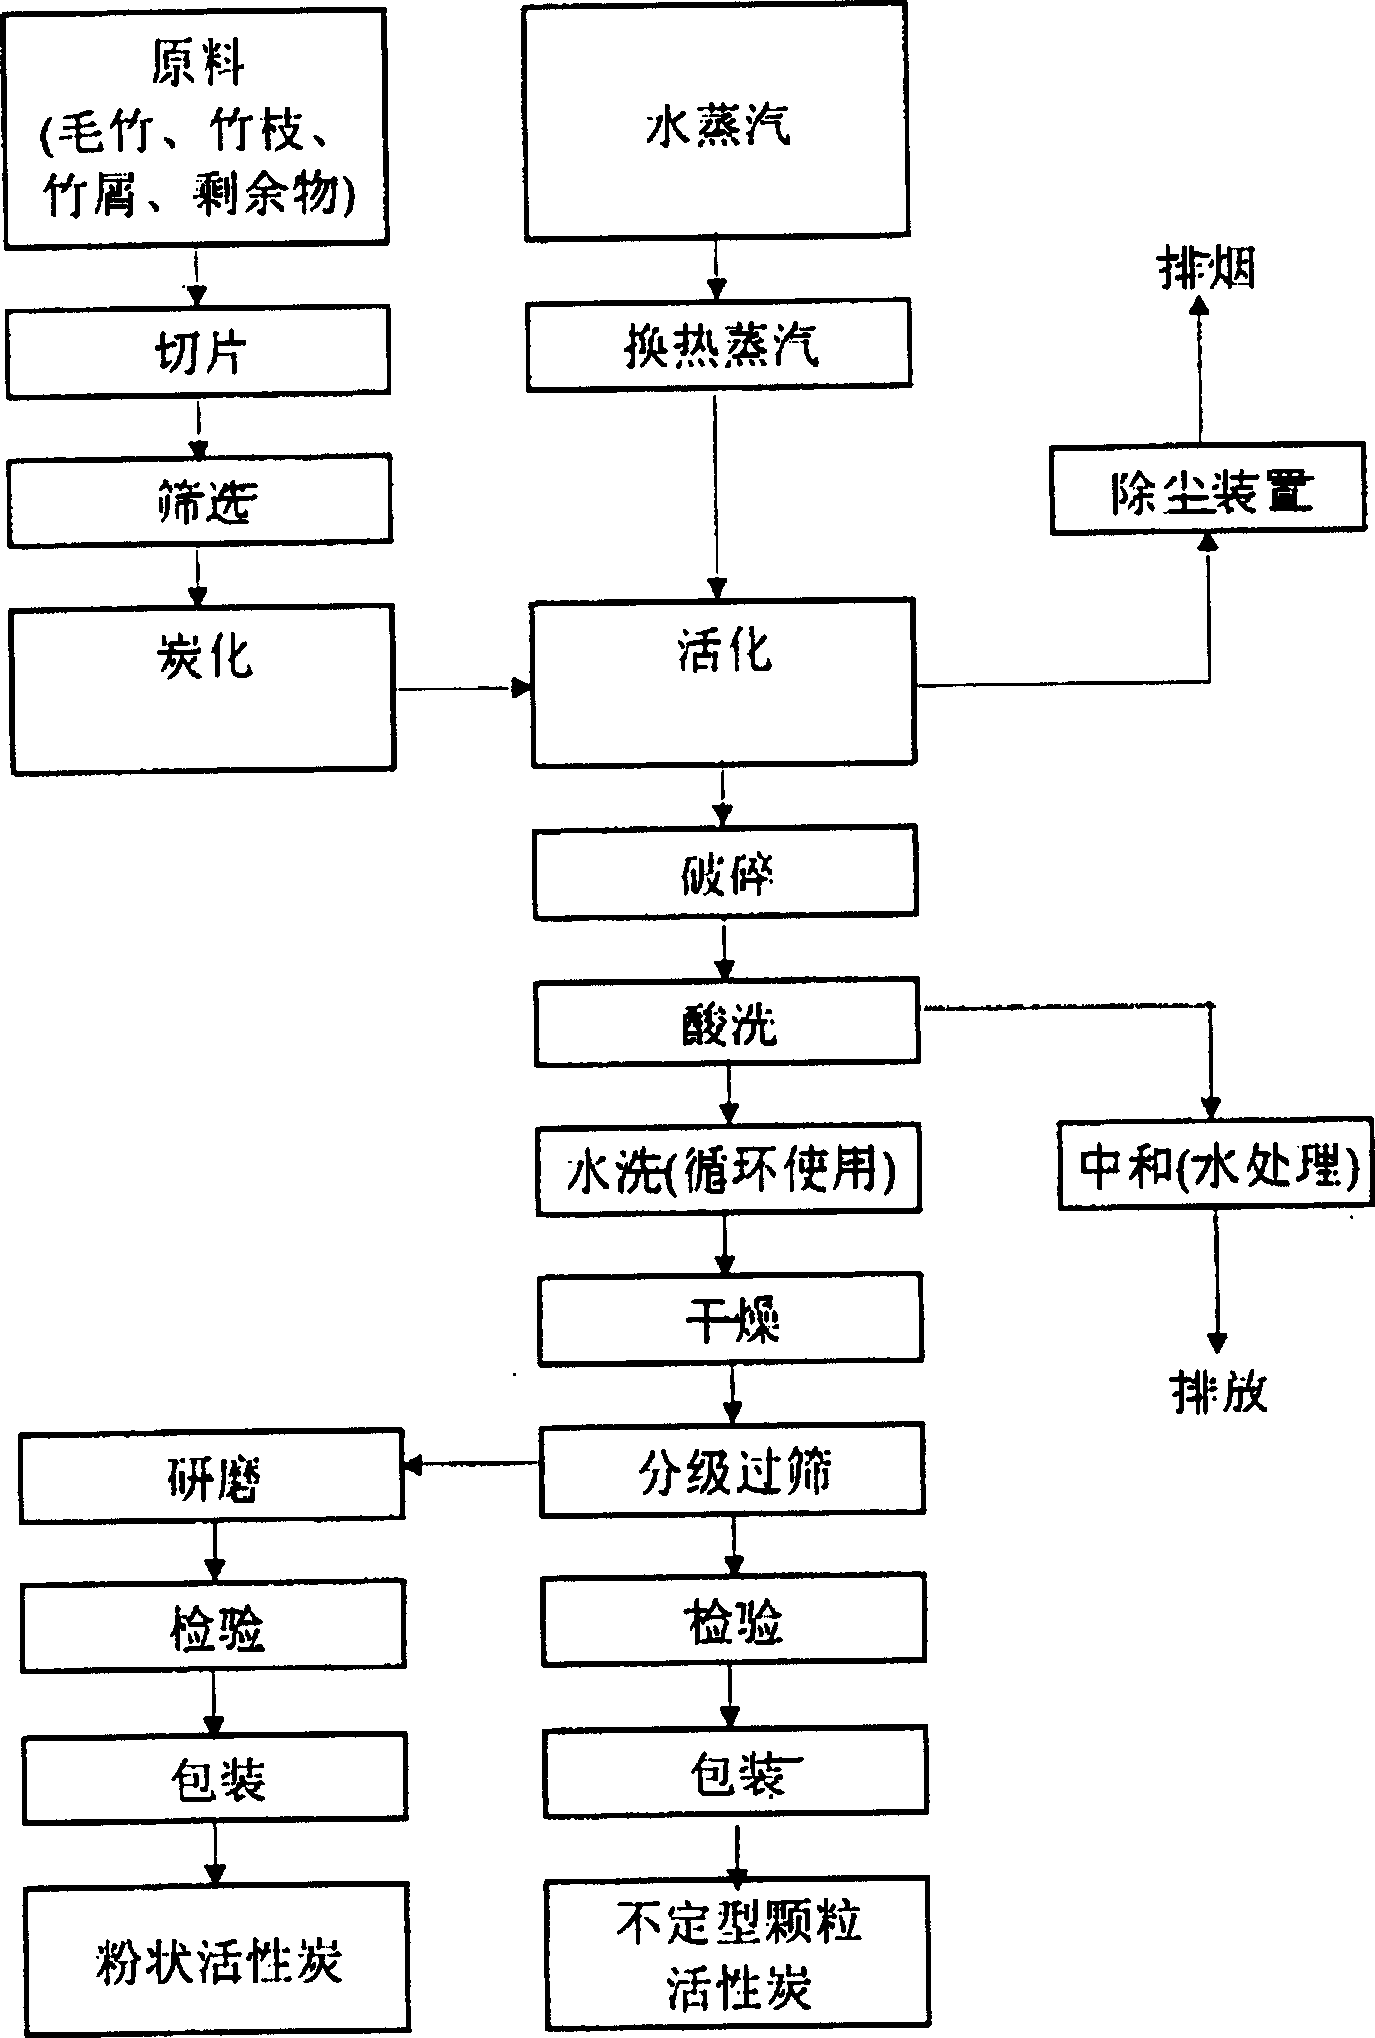 Method for preparing activated char from bamboo material